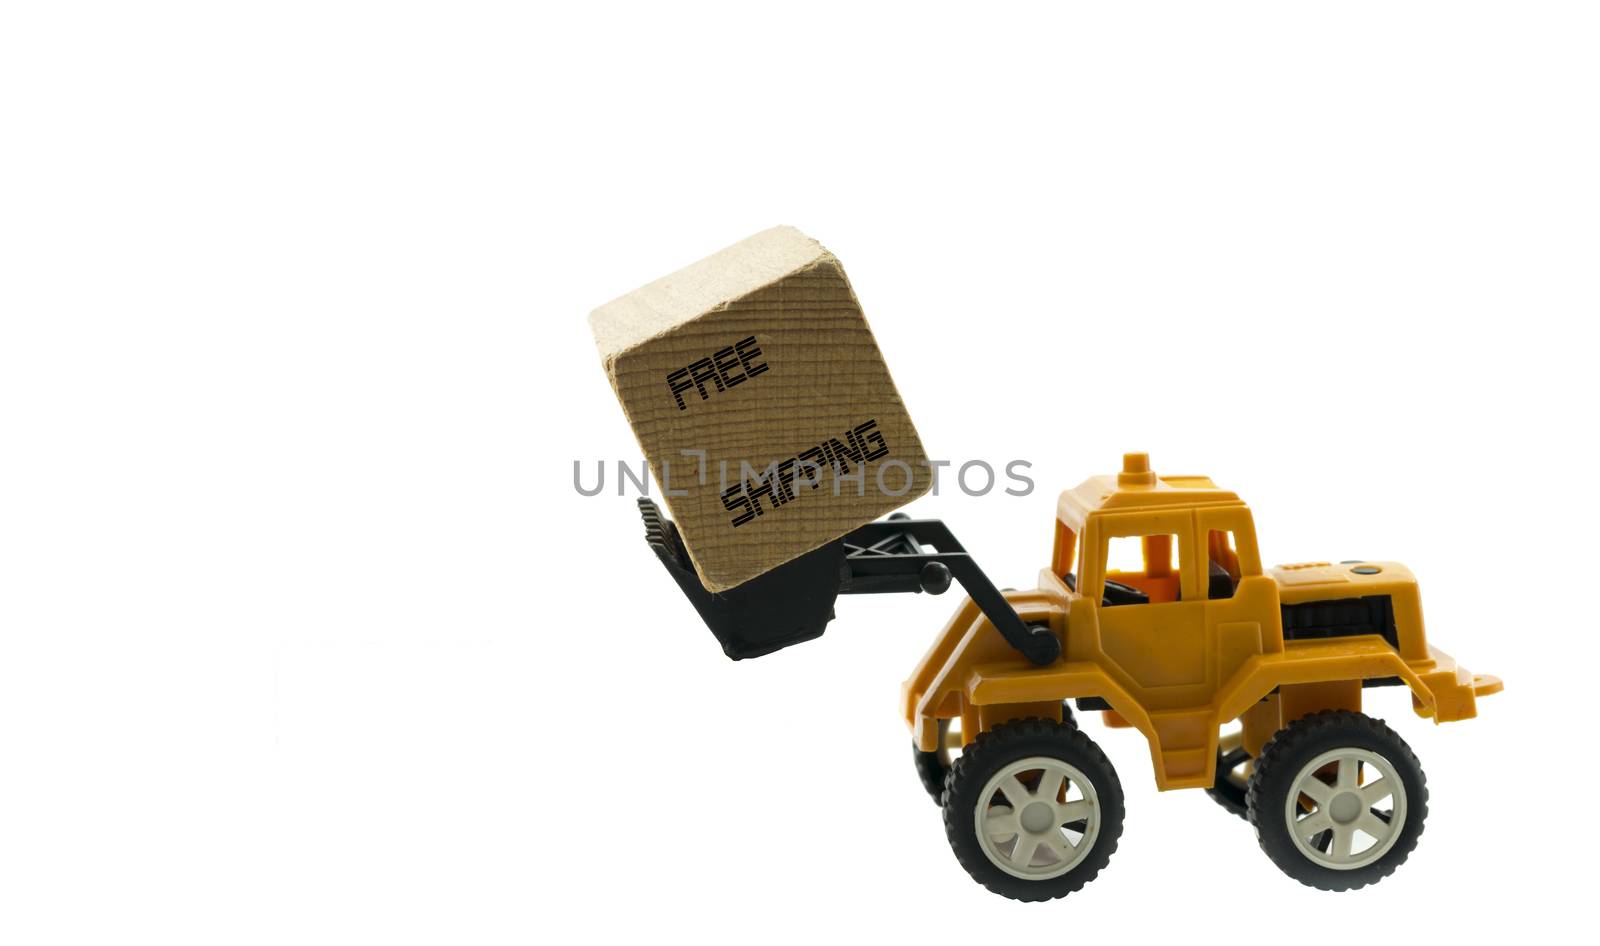 yellow excavator with free shipping block by compuinfoto